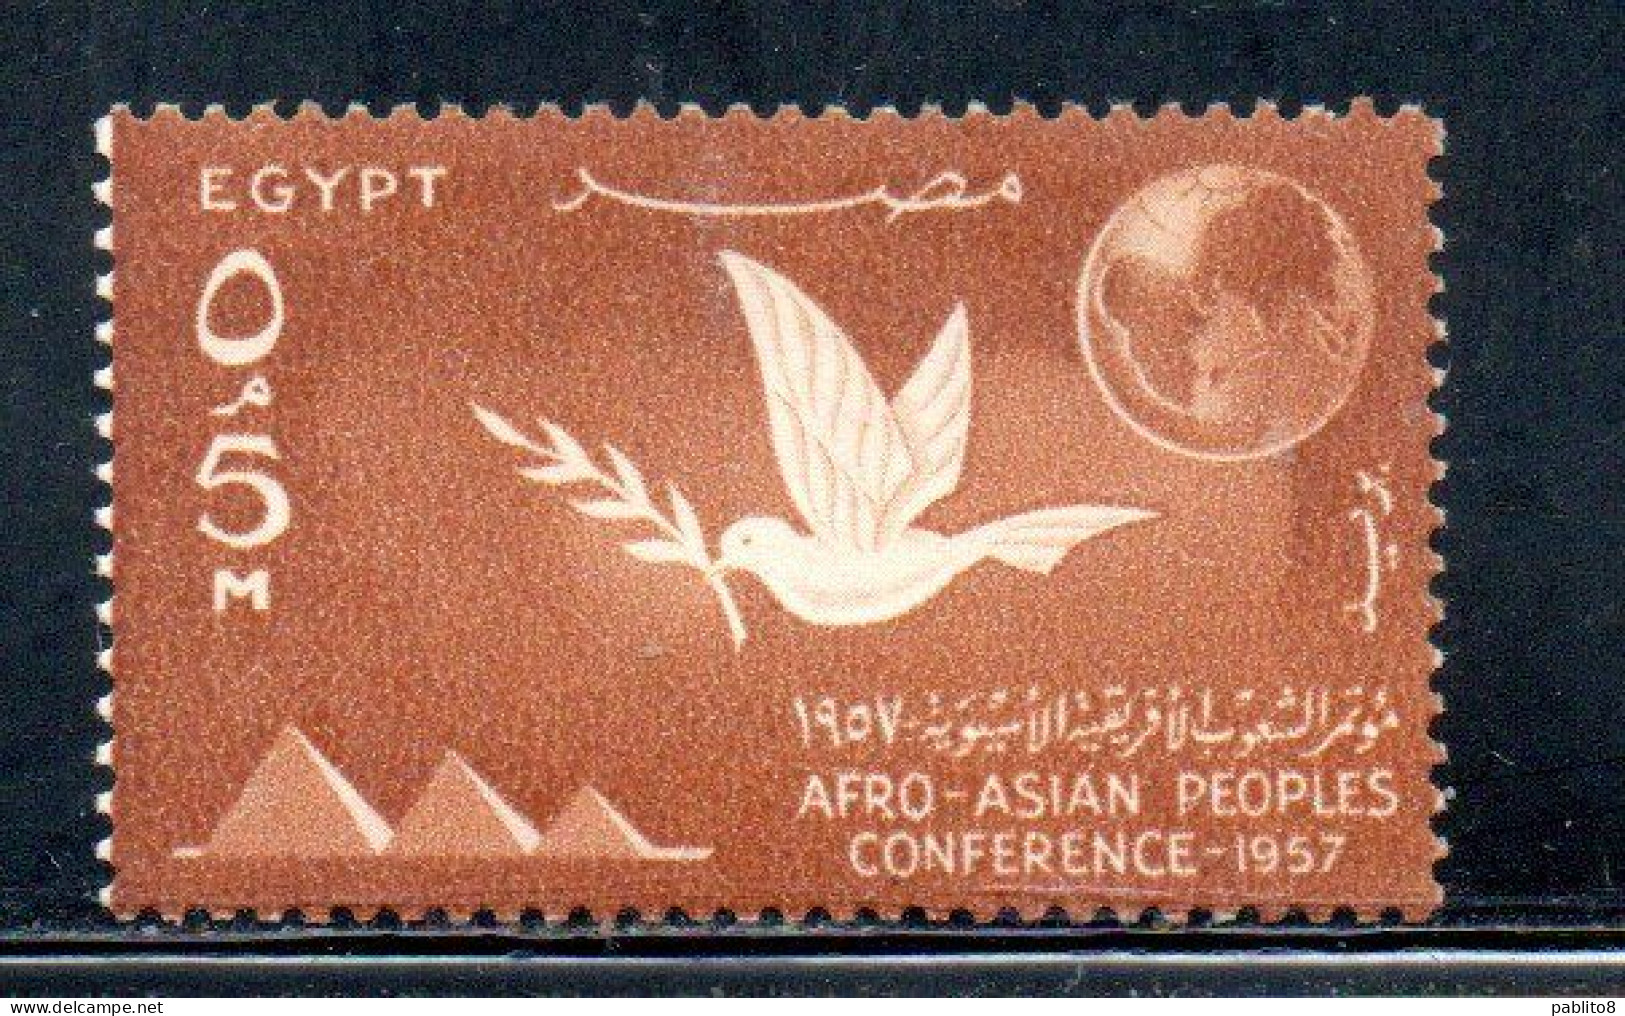 UAR EGYPT EGITTO 1957 AFRO-ASIAN PEOPLES CONFERENCE CAIRO PYRAMIDS DOVE AND GLOBE 5m MNH - Unused Stamps